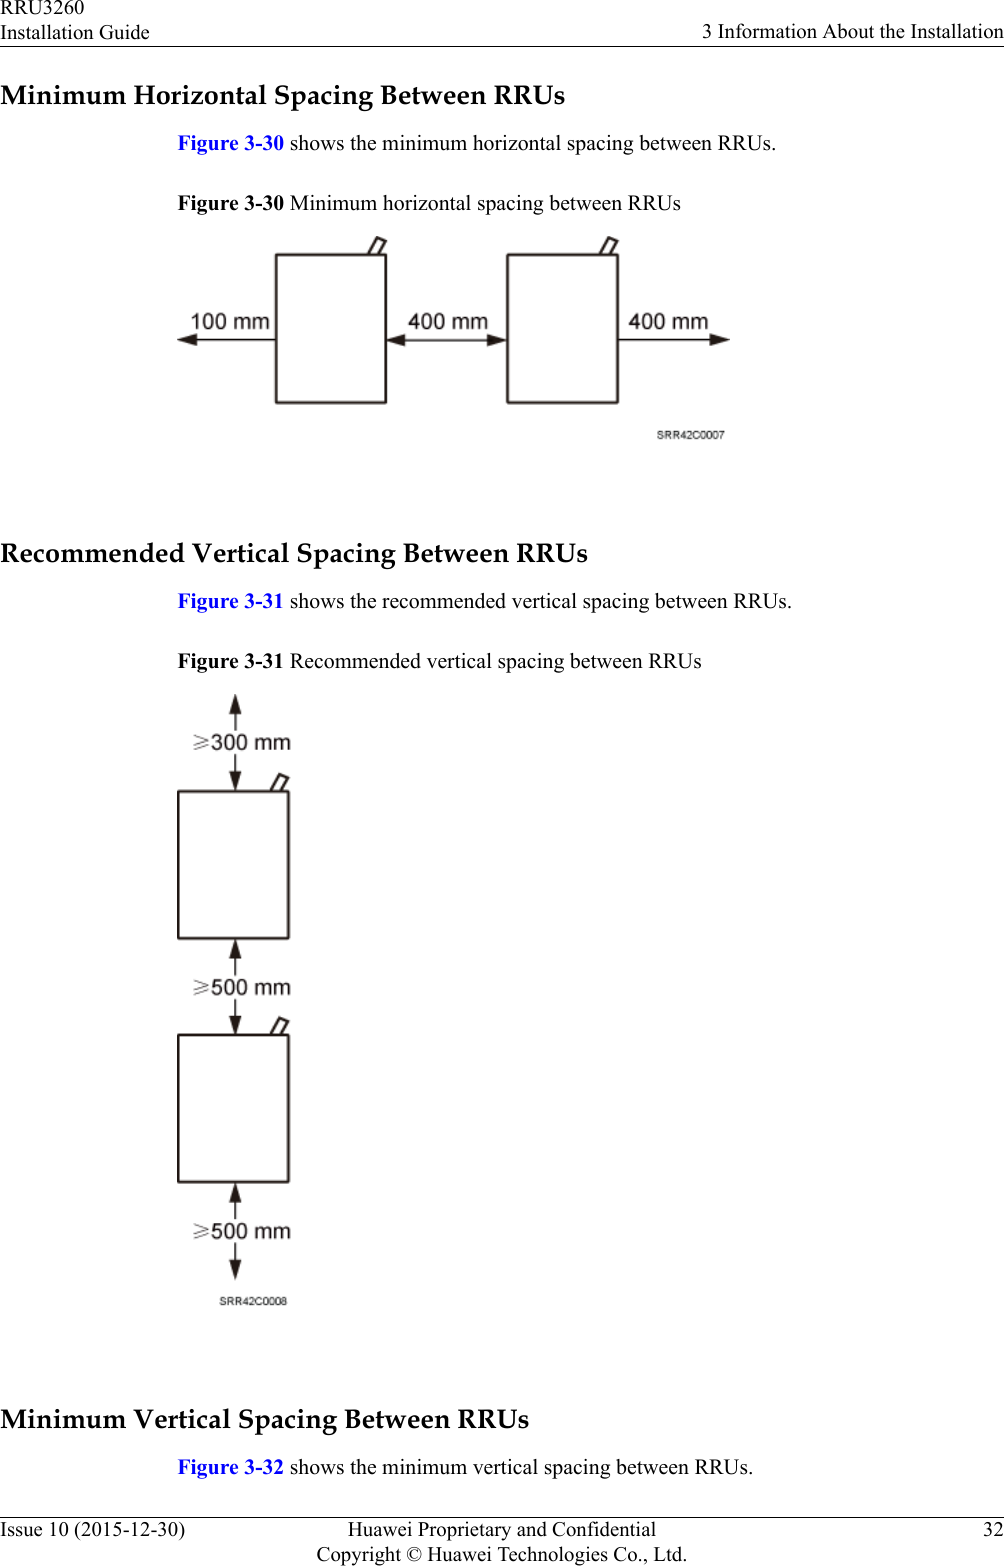 Minimum Horizontal Spacing Between RRUsFigure 3-30 shows the minimum horizontal spacing between RRUs.Figure 3-30 Minimum horizontal spacing between RRUs Recommended Vertical Spacing Between RRUsFigure 3-31 shows the recommended vertical spacing between RRUs.Figure 3-31 Recommended vertical spacing between RRUs Minimum Vertical Spacing Between RRUsFigure 3-32 shows the minimum vertical spacing between RRUs.RRU3260Installation Guide 3 Information About the InstallationIssue 10 (2015-12-30) Huawei Proprietary and ConfidentialCopyright © Huawei Technologies Co., Ltd.32